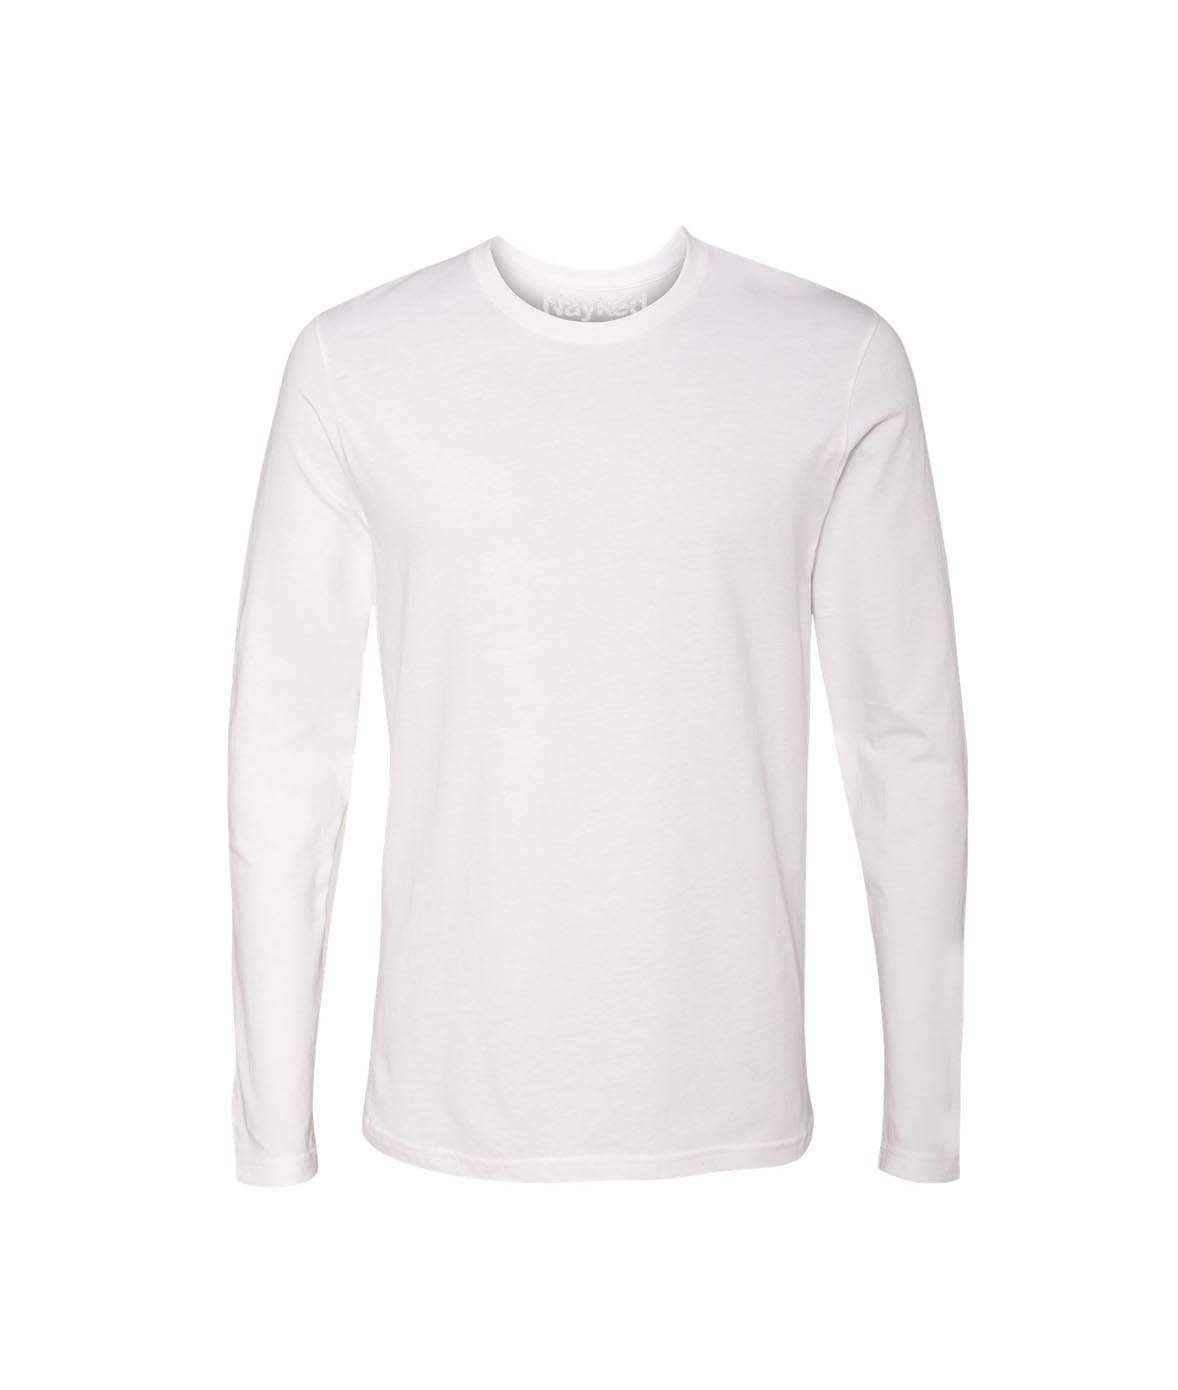 Soft Sleeve 100% Cotton T-Shirt - Nayked Apparel